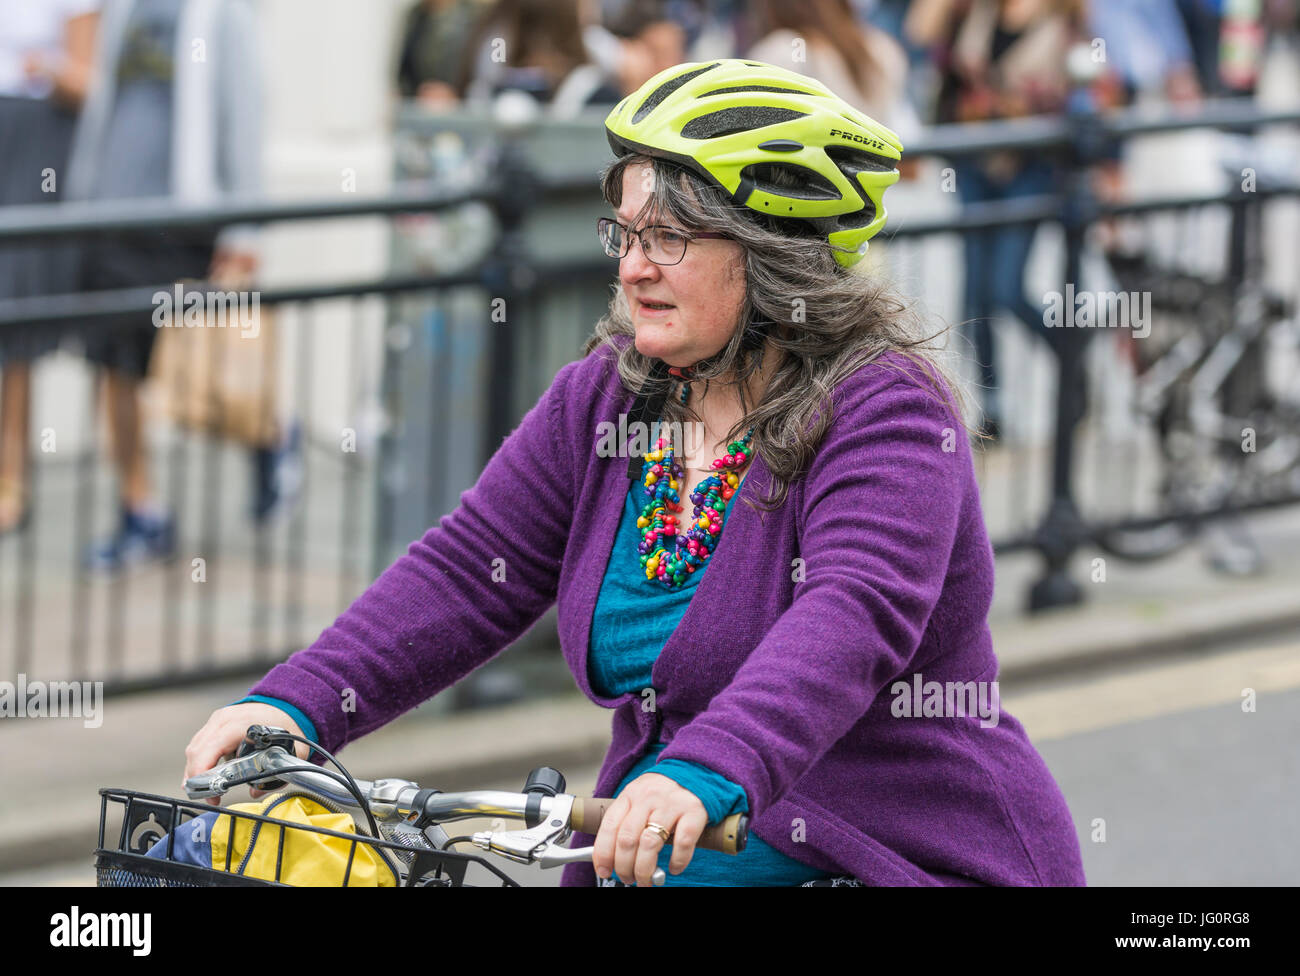 Middle aged female cyclist riding a bicycle while wearing a helmet in a city. Stock Photo